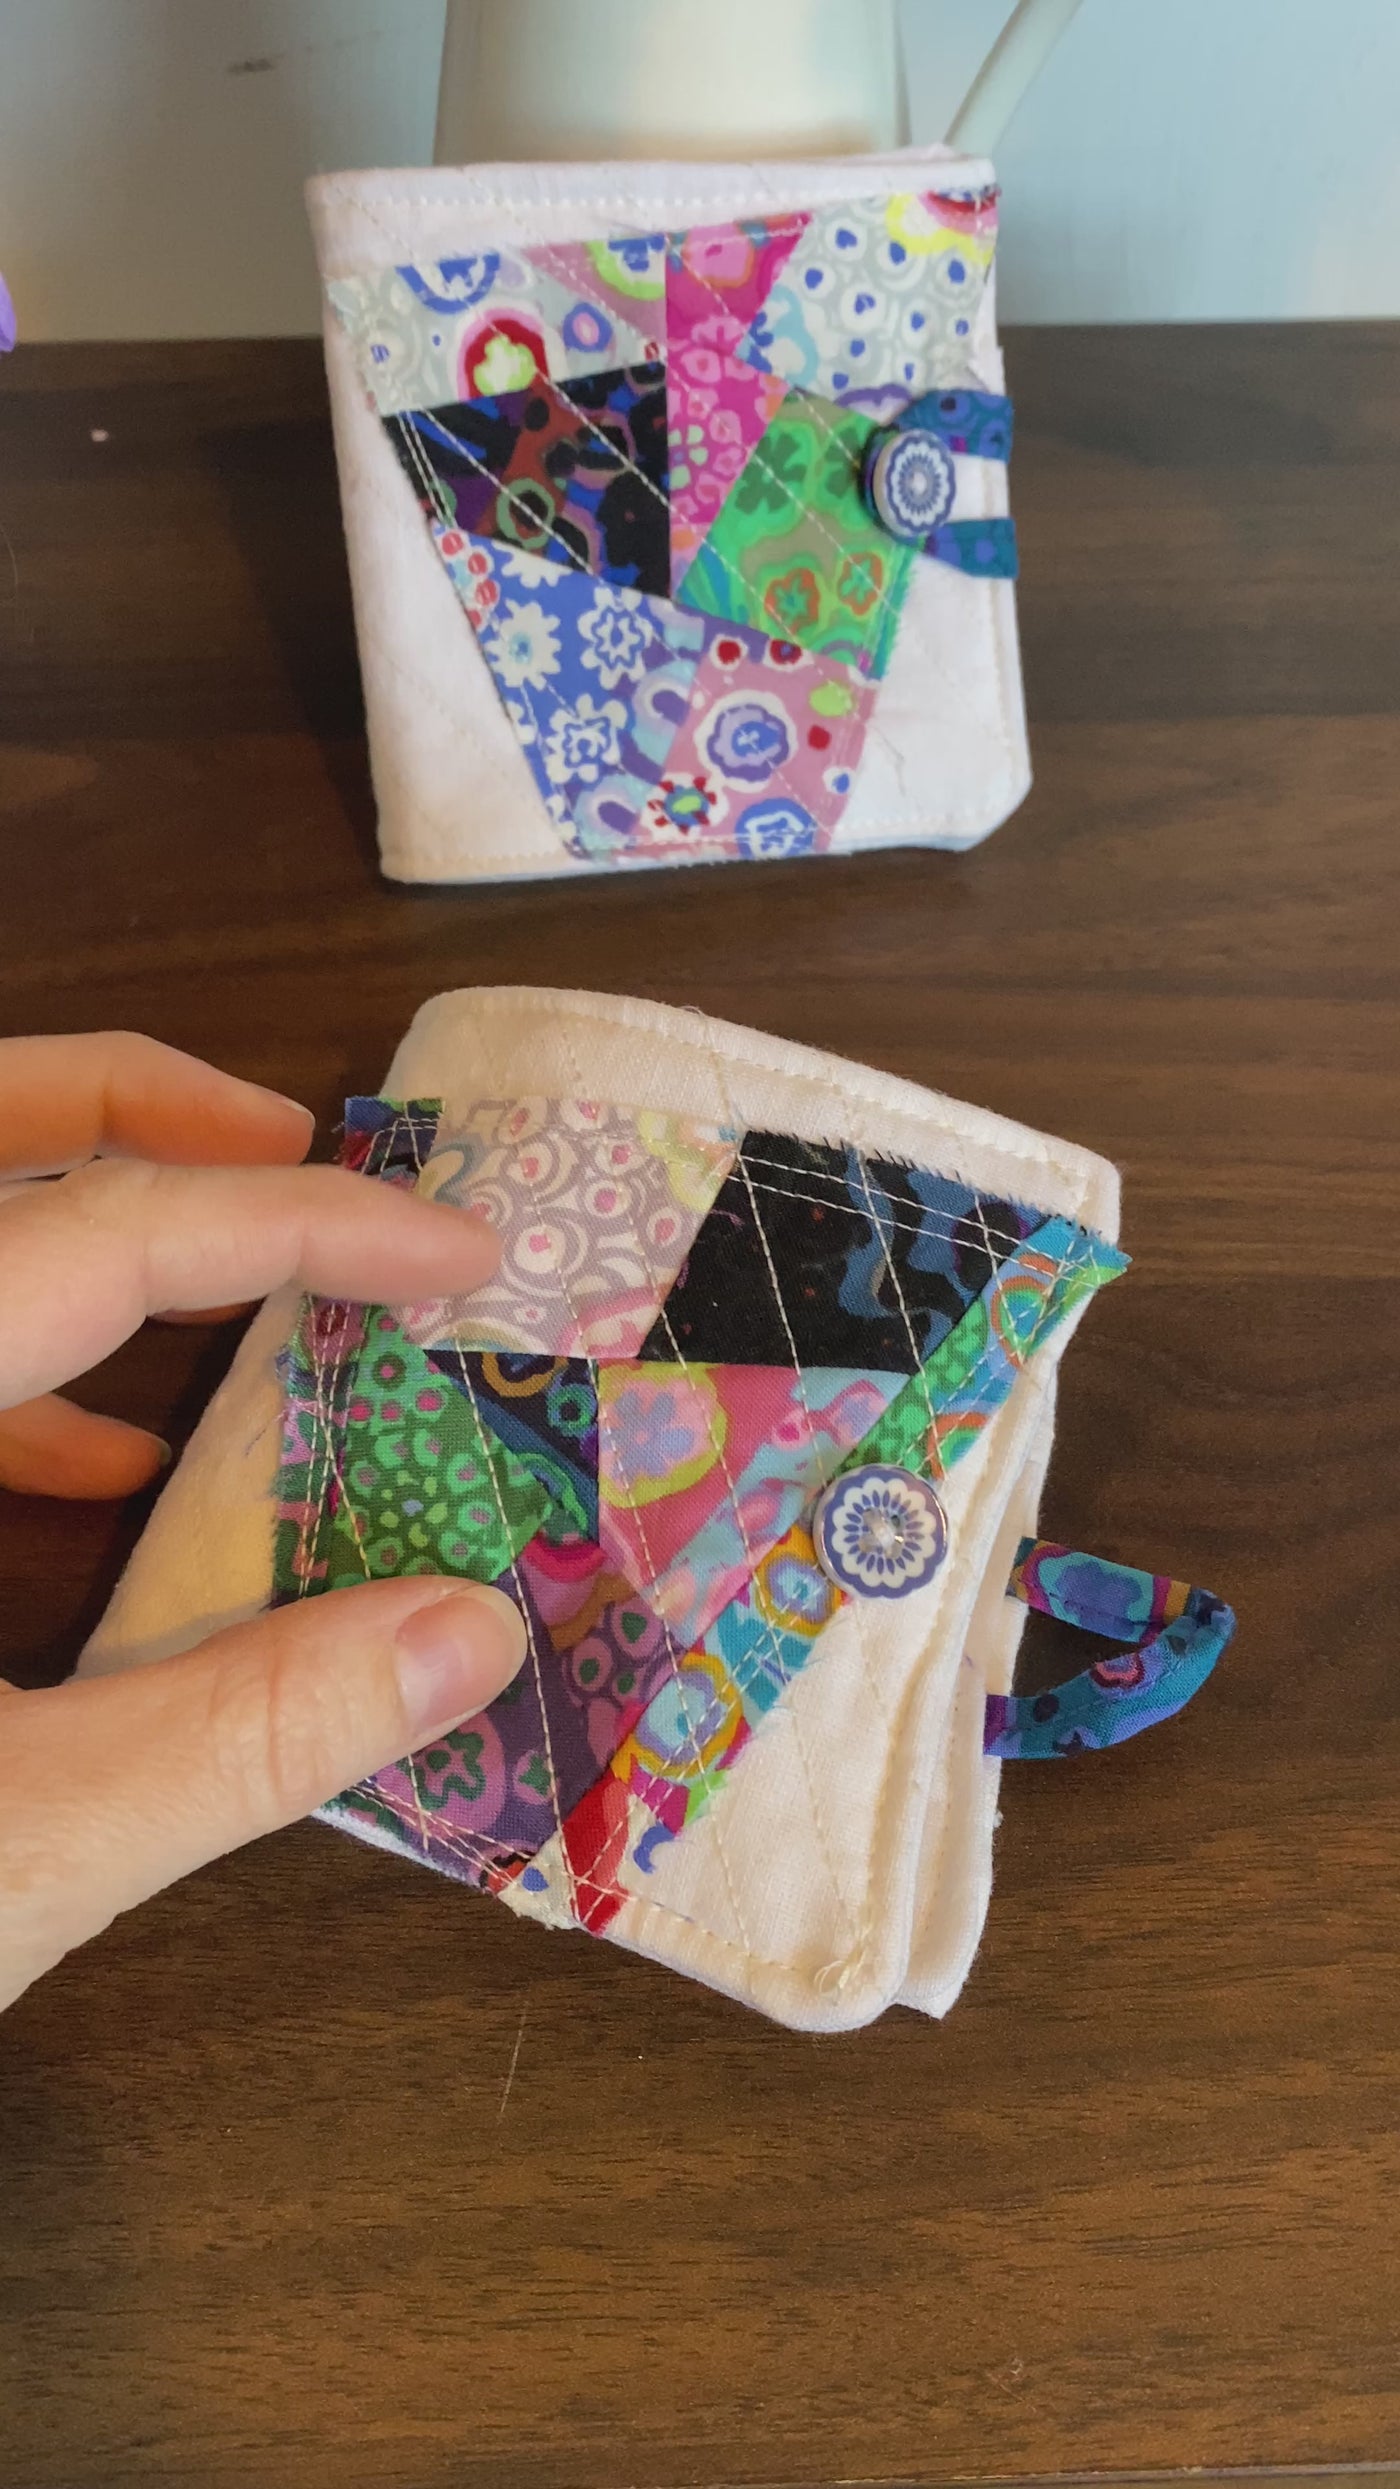 A video of A small quilted 3 1/2" x 3 1/2" needlebook with abstract fabric colors of pinks, blacks, blues. Perfect for needles, thread and scissors